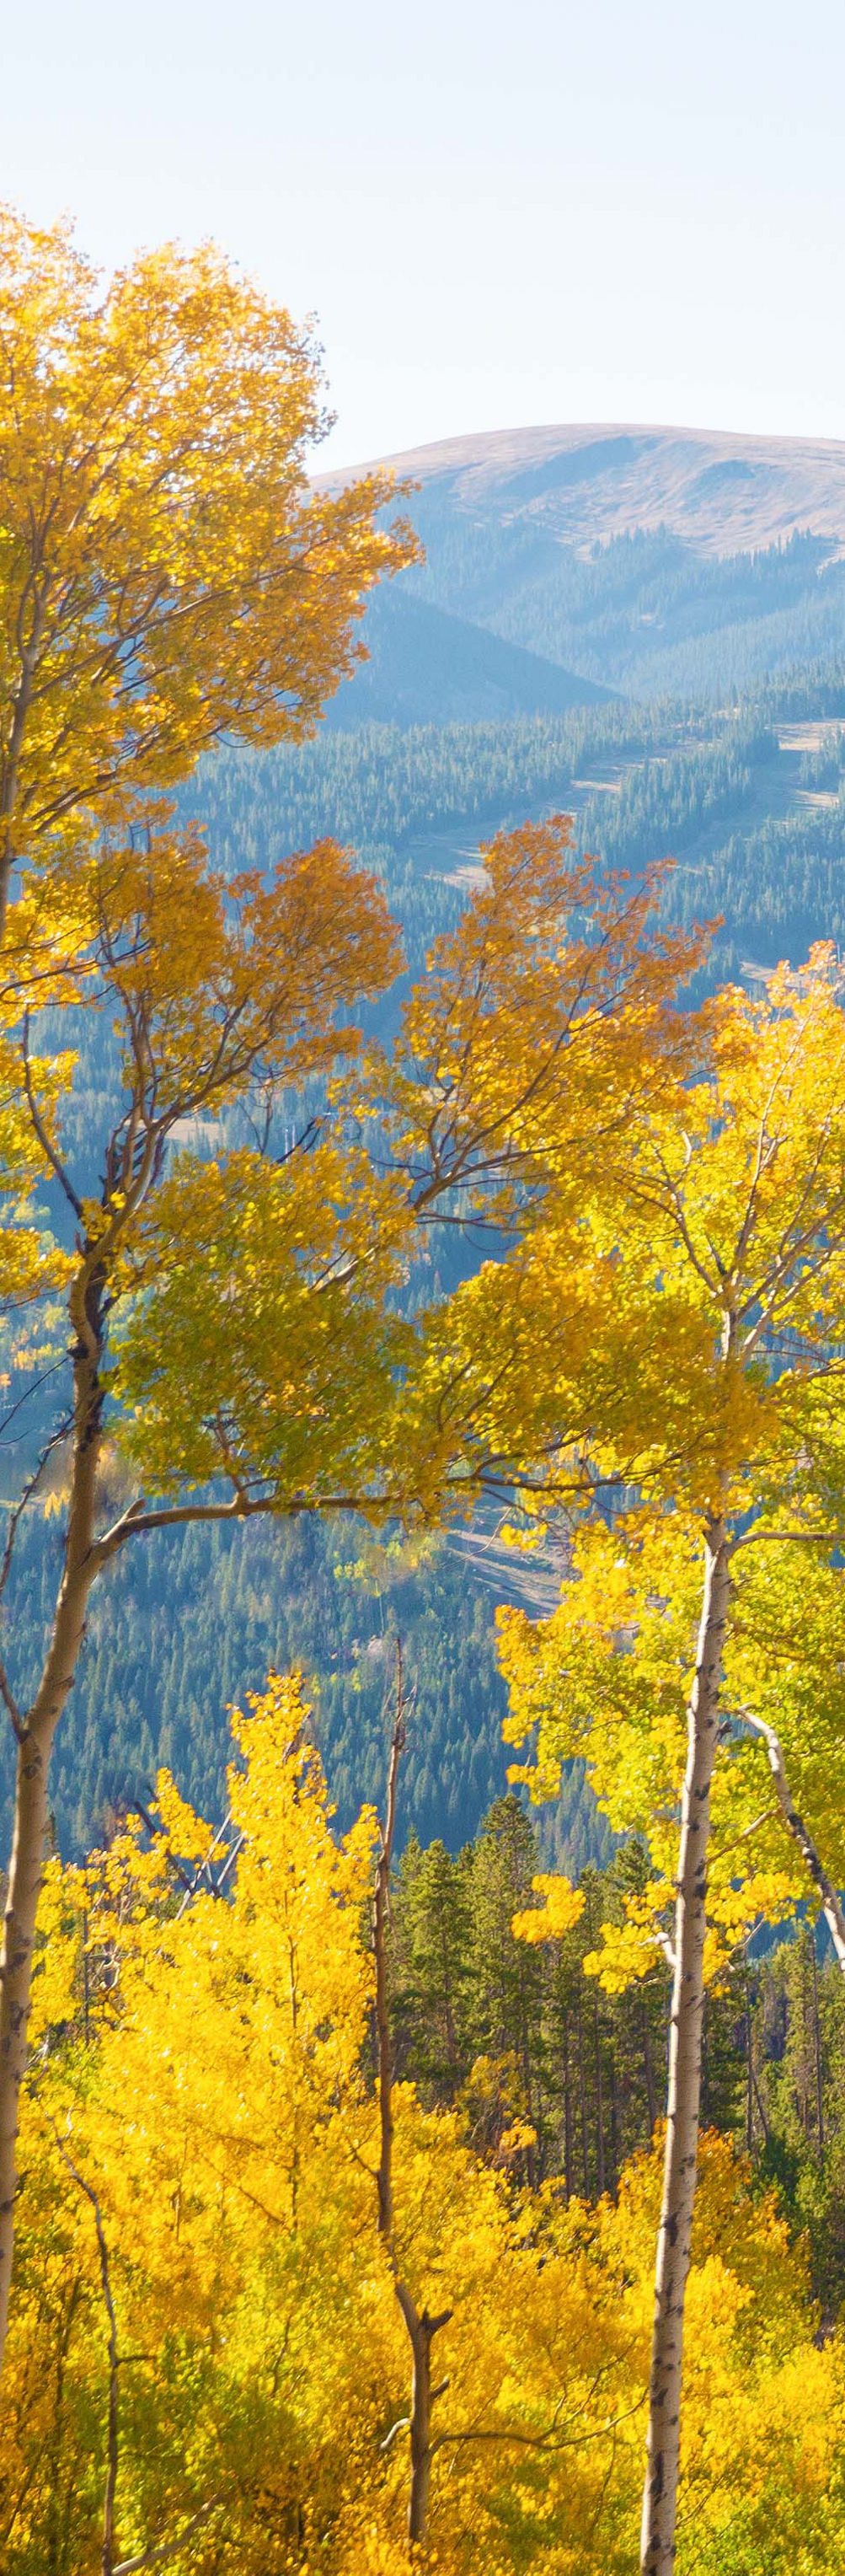 8 Things to Experience This Fall at Keystone